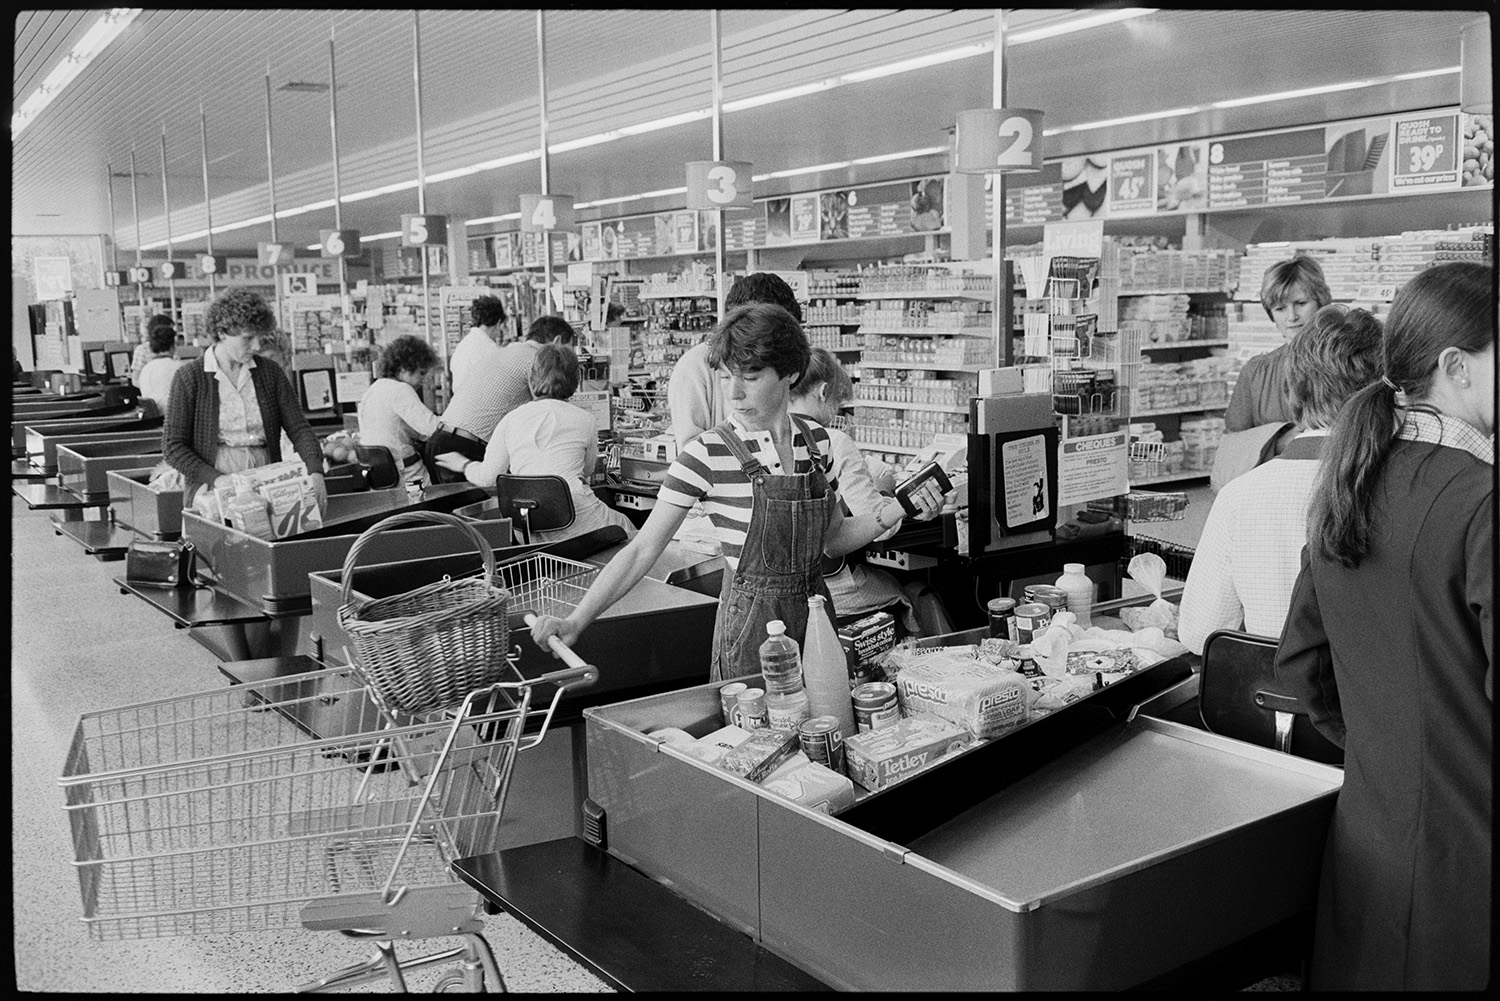 Interior of supermarket, people shopping, car park. Fruit, cash desk, check out.
[Customers at Presto Food Market in Bideford paying for their shopping at cash tills. One woman has a shopping trolley and a basket. Shelves stacked with good are visible in the background.]]